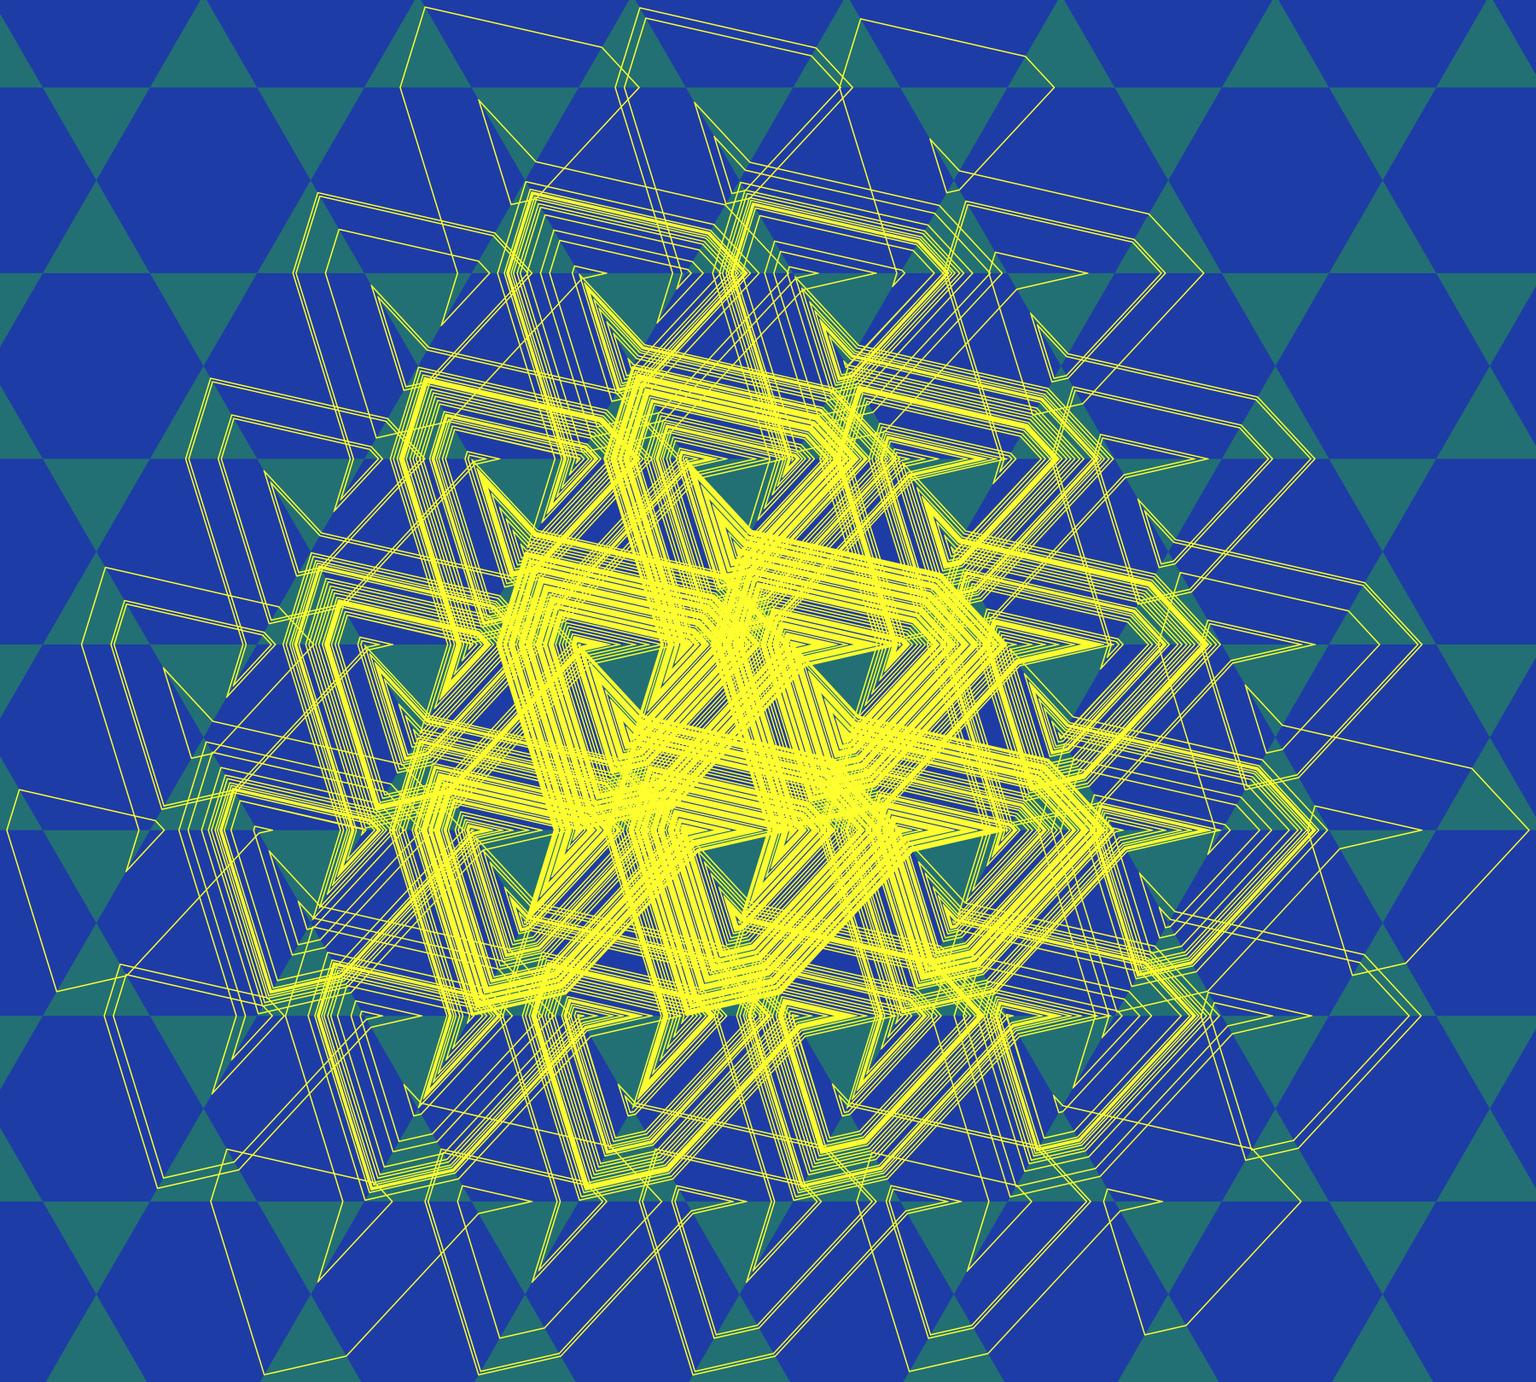 Image for entry 'Refraction in the trihexagonal tiling'